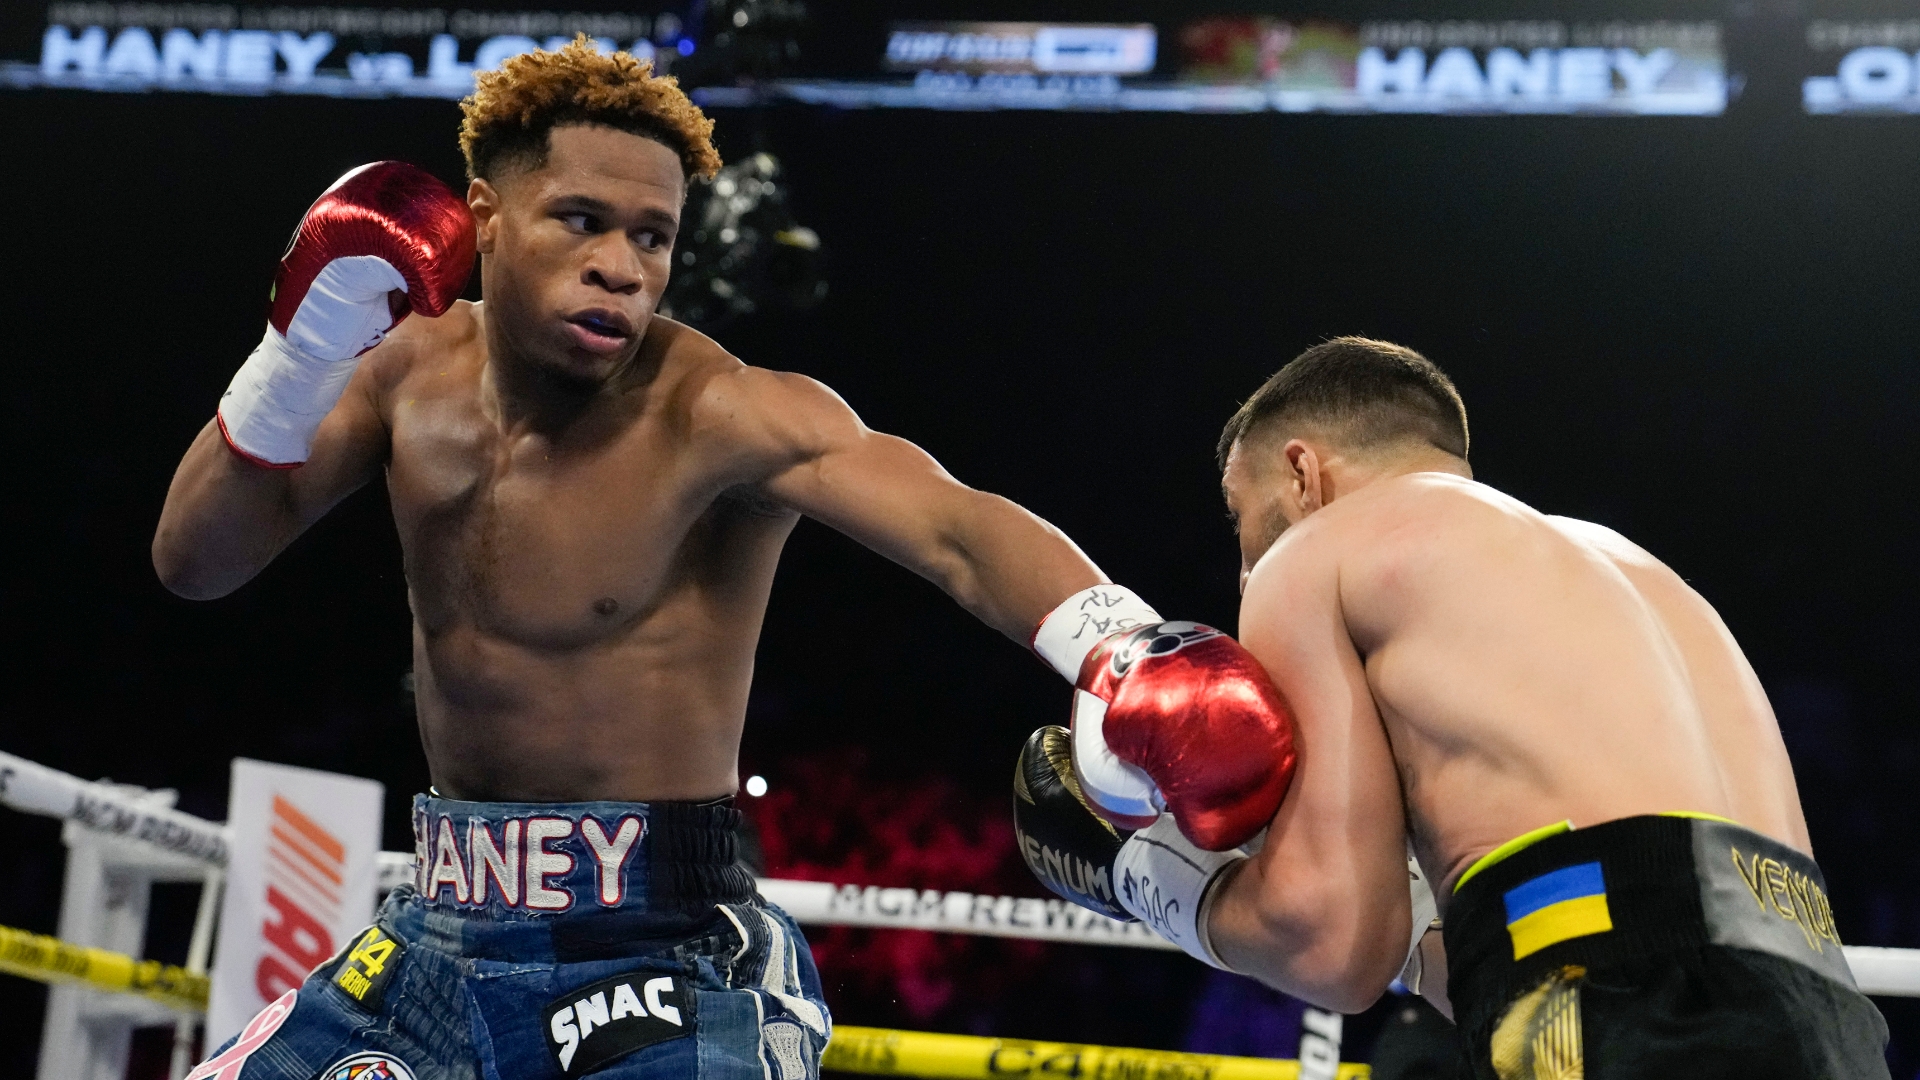 Devin Haneys undefeated record stands in stunning decision win - Stream the Video